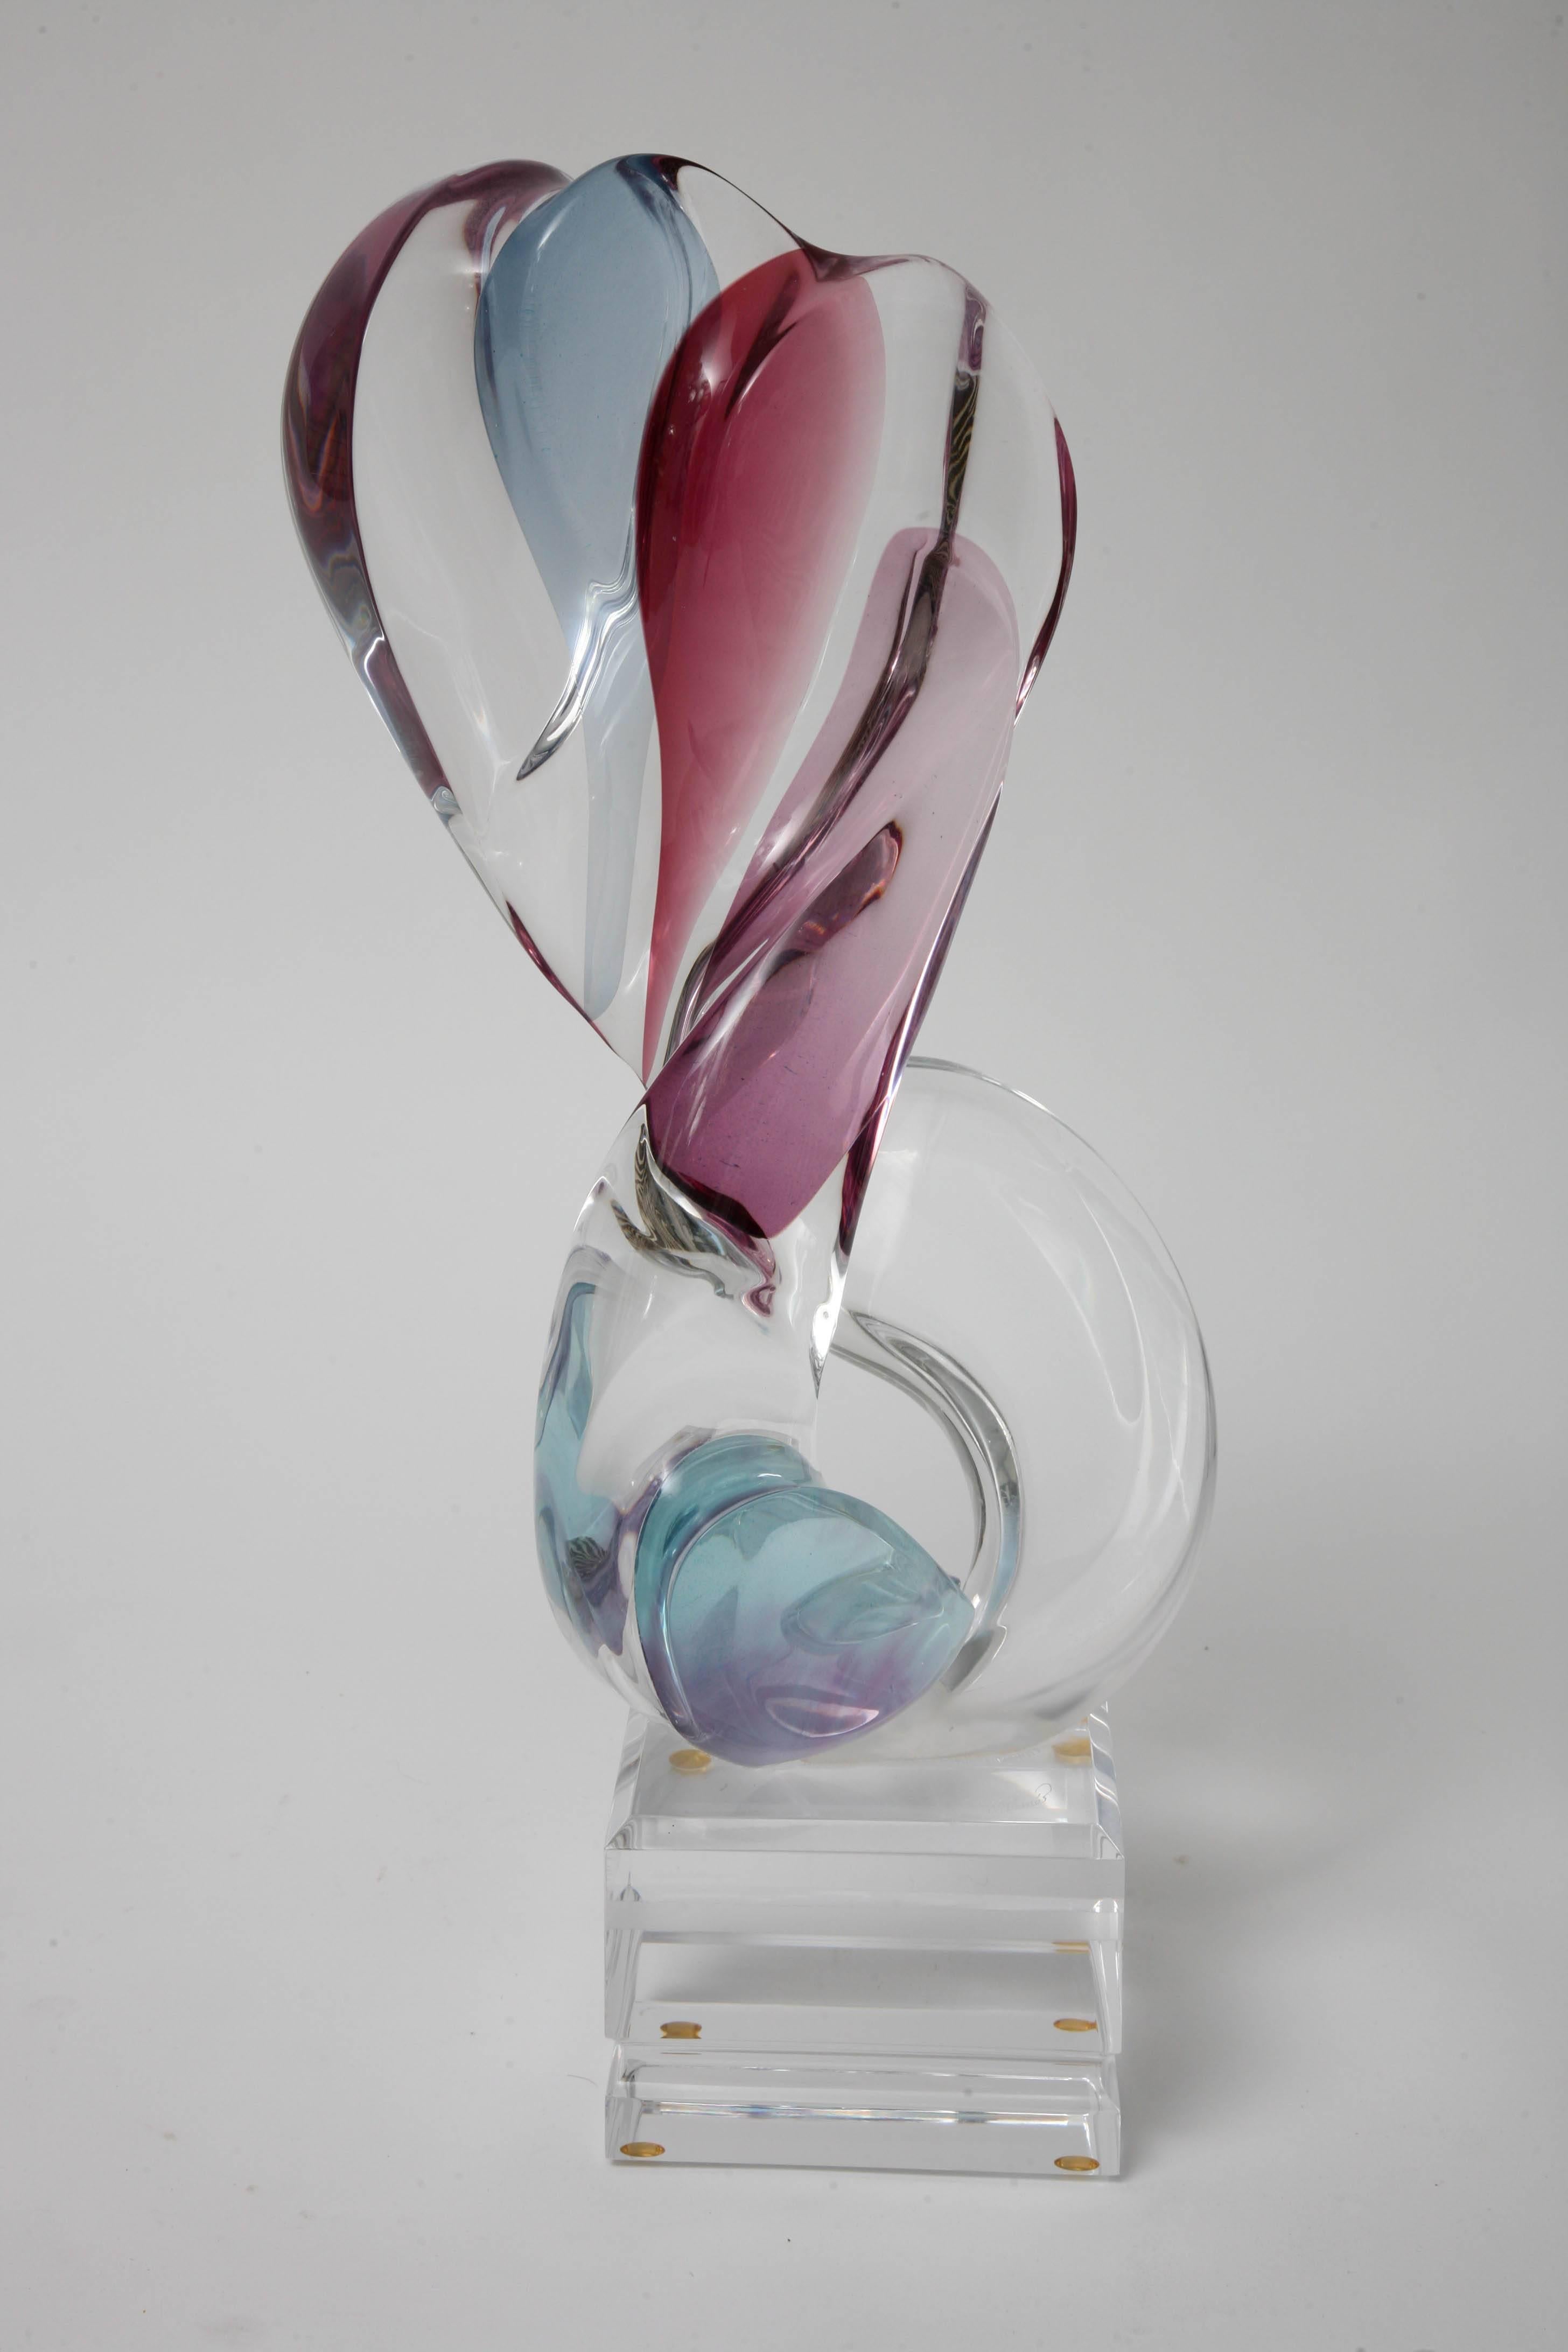 This Lucite sculpture is by the sculptor Michael Bene' and here he it would seem to be that he has captured two lovers embracing. As the two lovers embrace they seem to form the shape of a heart. The artist use of blues for one figure and rose for